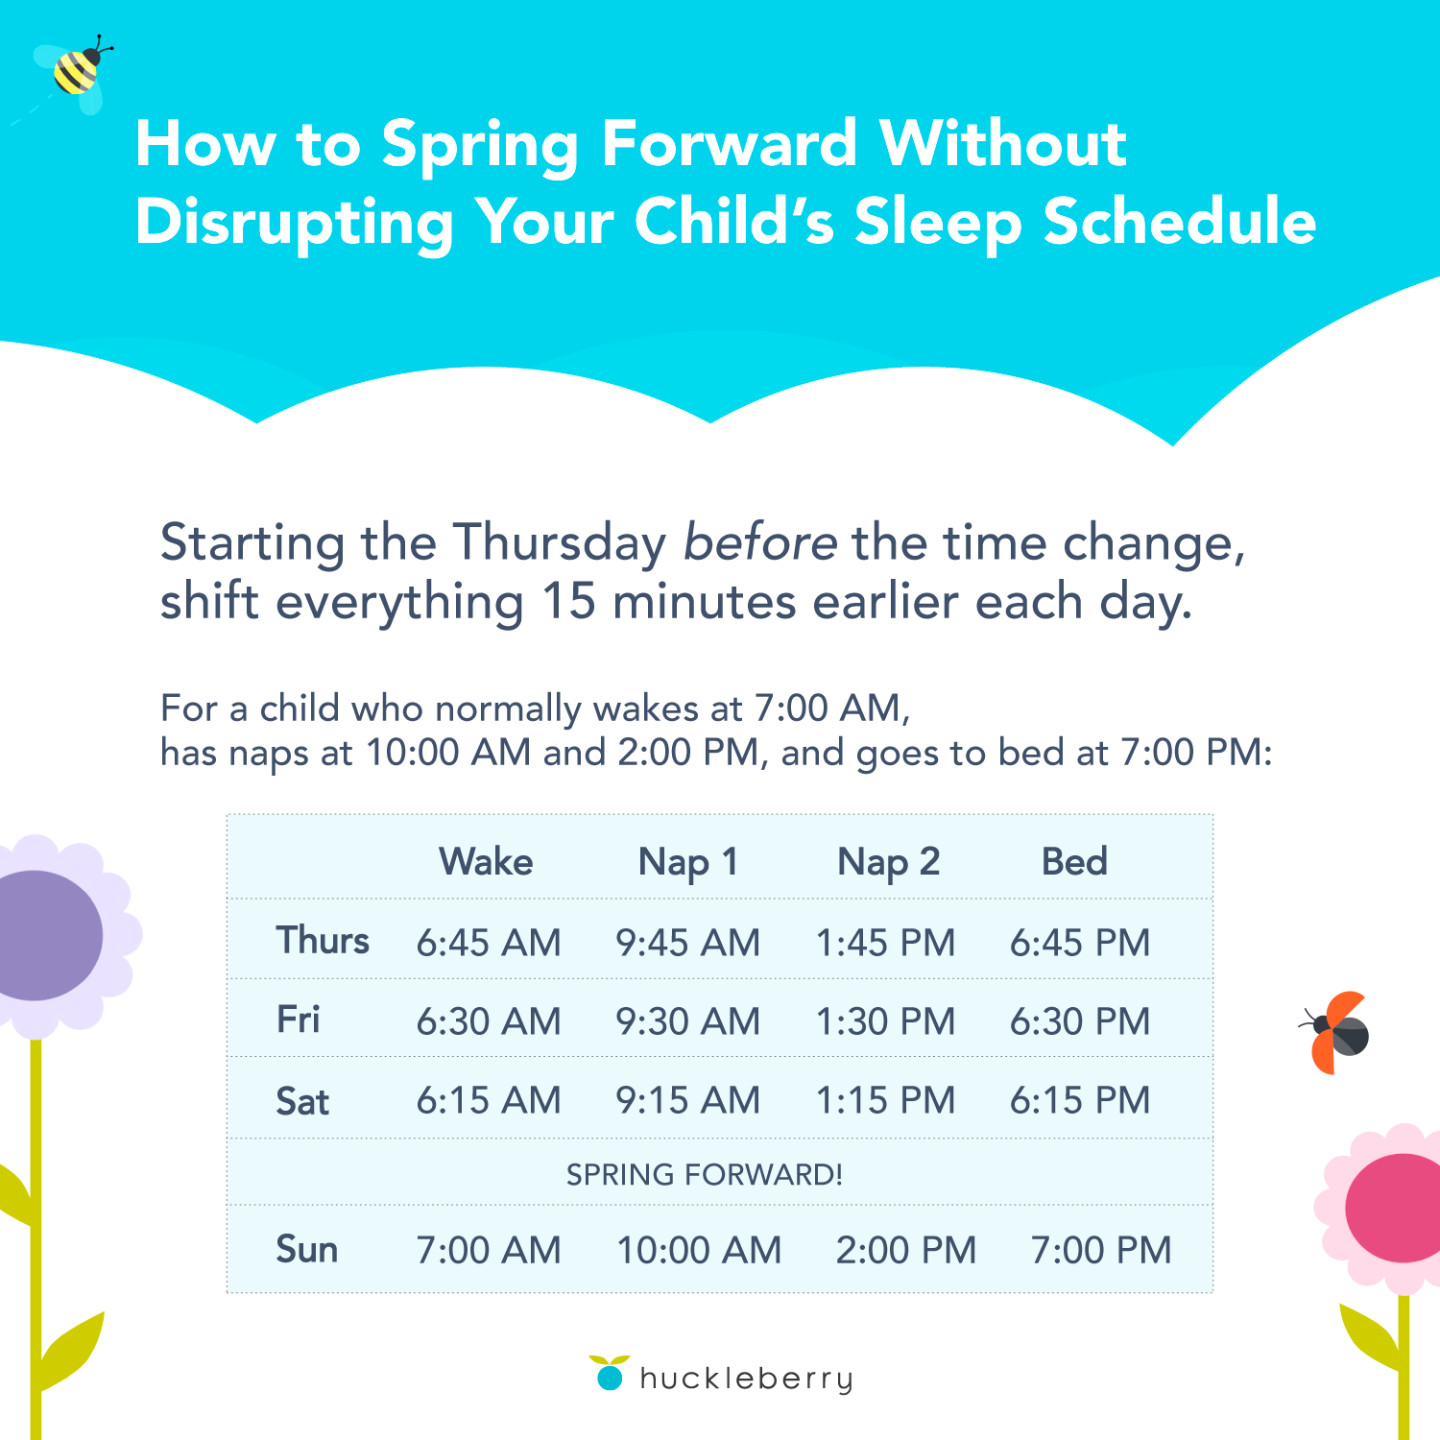 Here's how to spring forward during the spring DST time change without changing your child's sleep schedule.